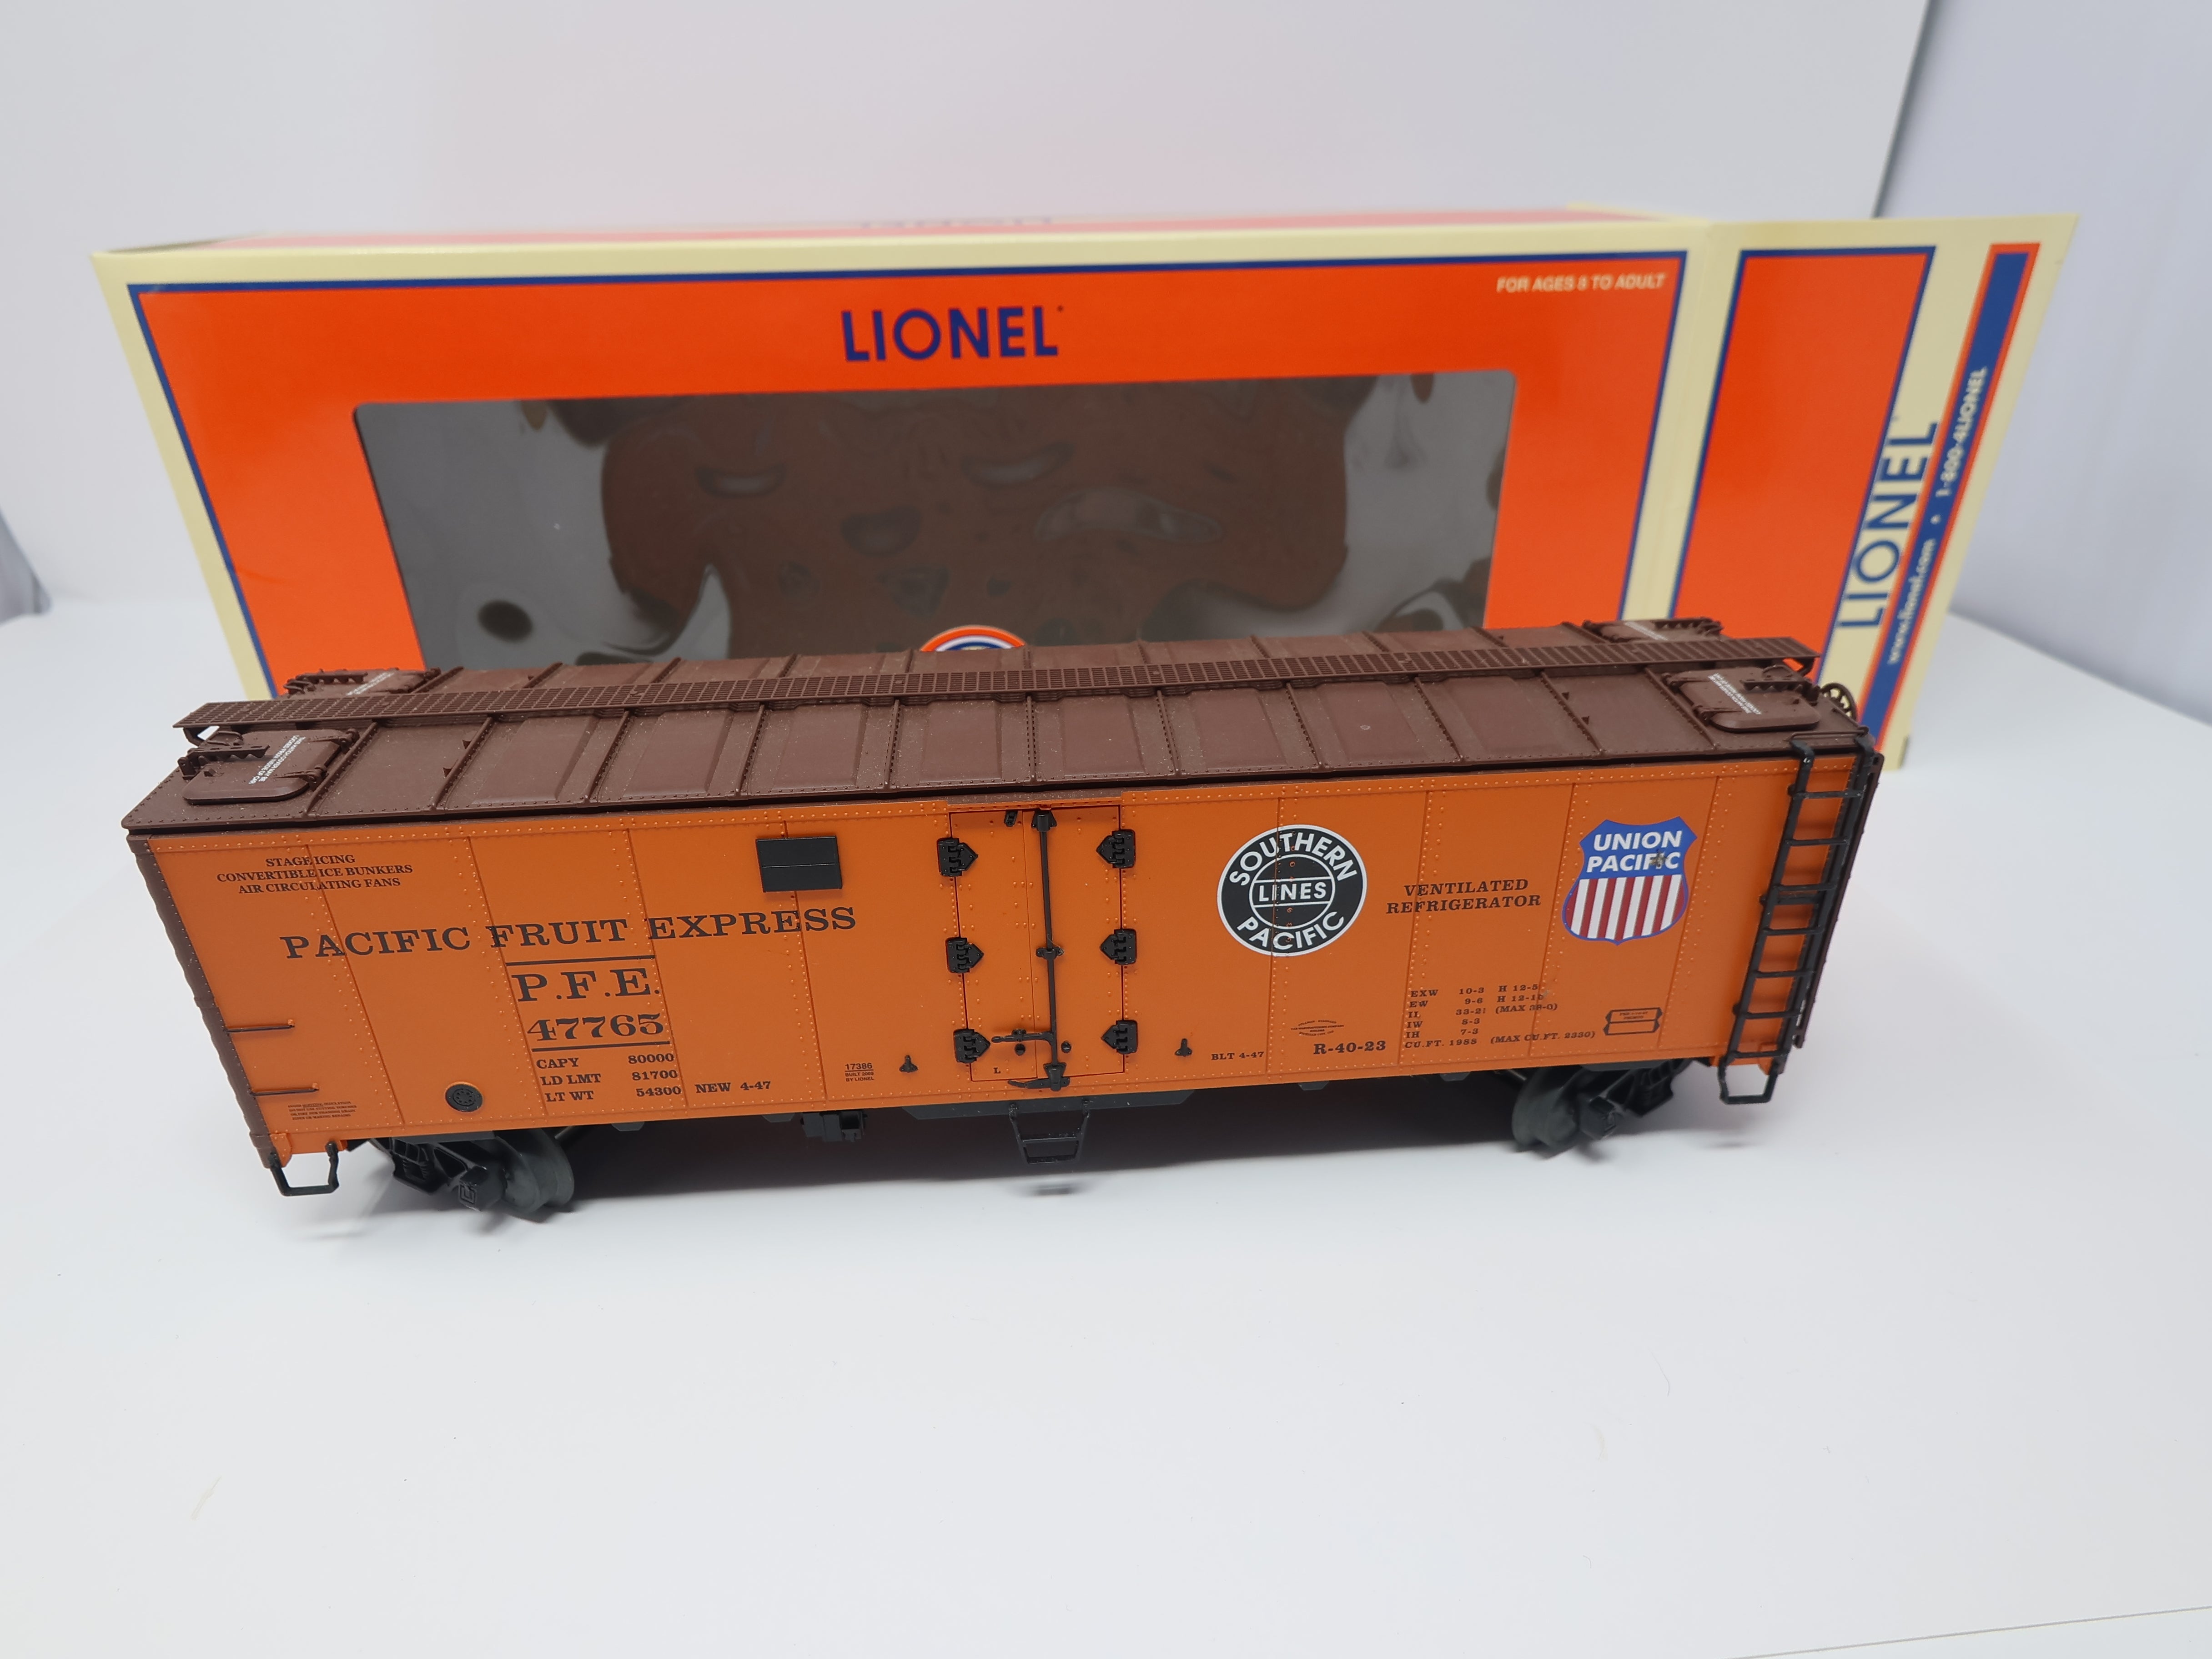 USED Lionel 6-17386 O, Steel Sided Refrigerator Car, Pacific Fruit Express PFE #47765